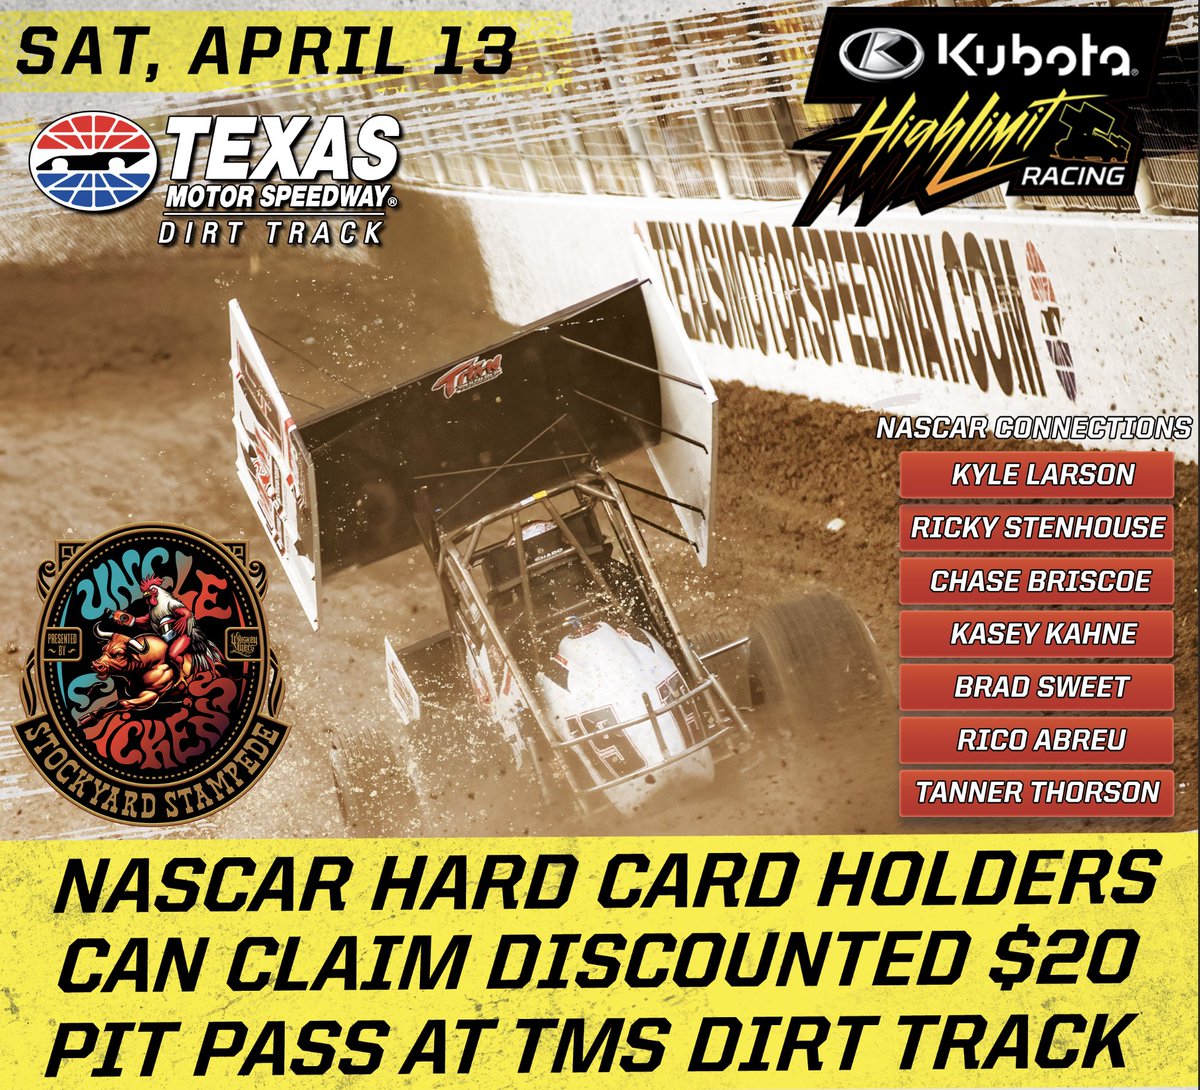 Any @NASCAR hard card holders can claim a discounted pit pass this Saturday night at @TXMotorSpeedway Dirt Track. Many @Kubota_USA High Limit Sprint Cars stars racing on Saturday have connections to the NASCAR garage. 👇🏼